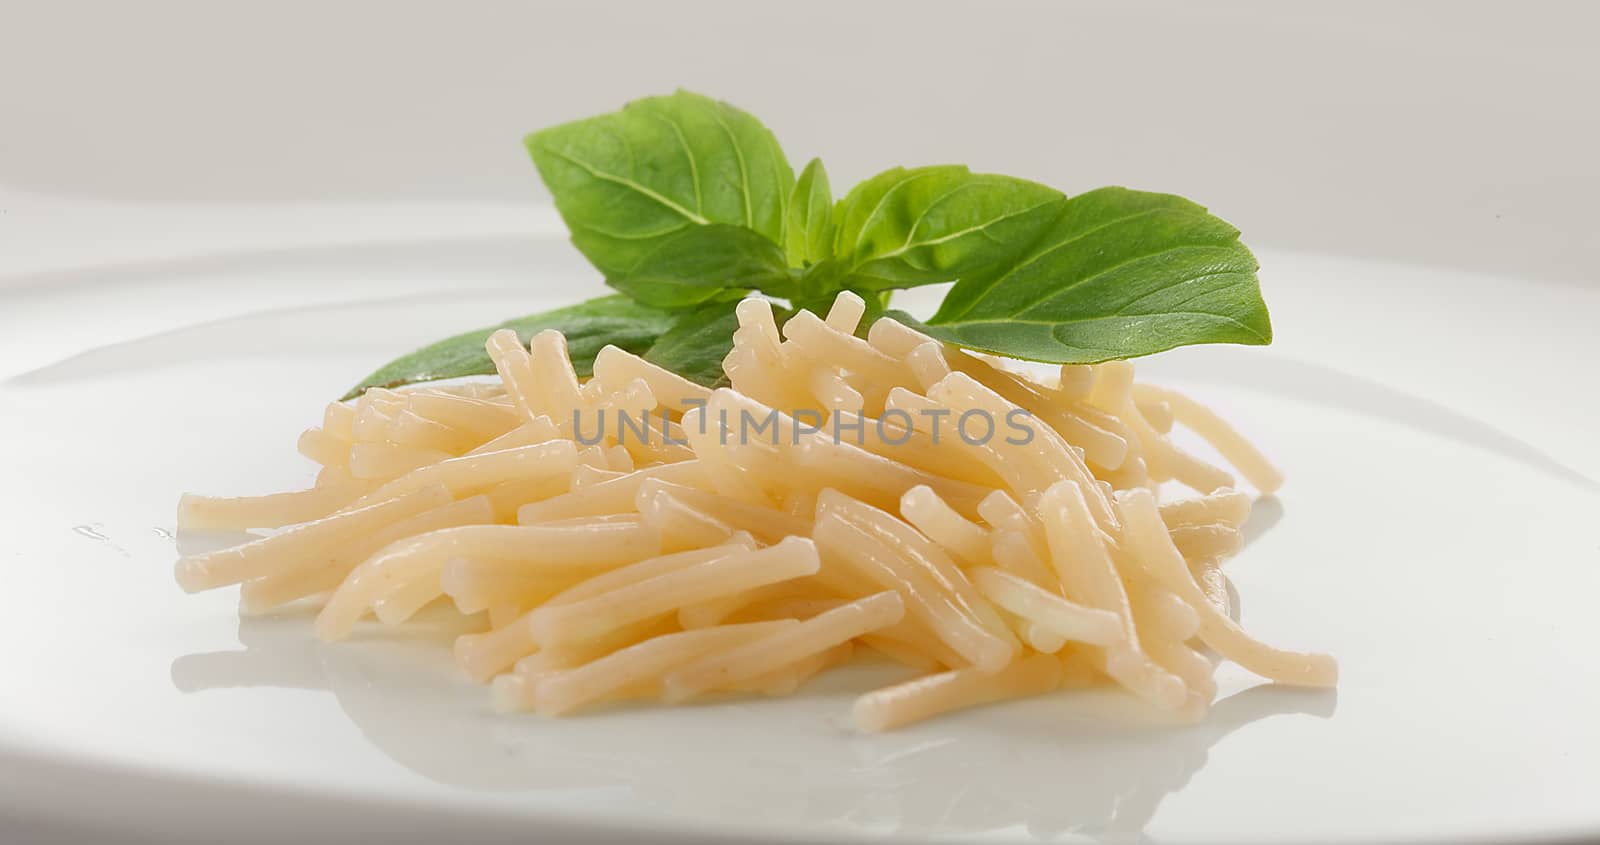 Boiled vermicelli with green basil by Angorius